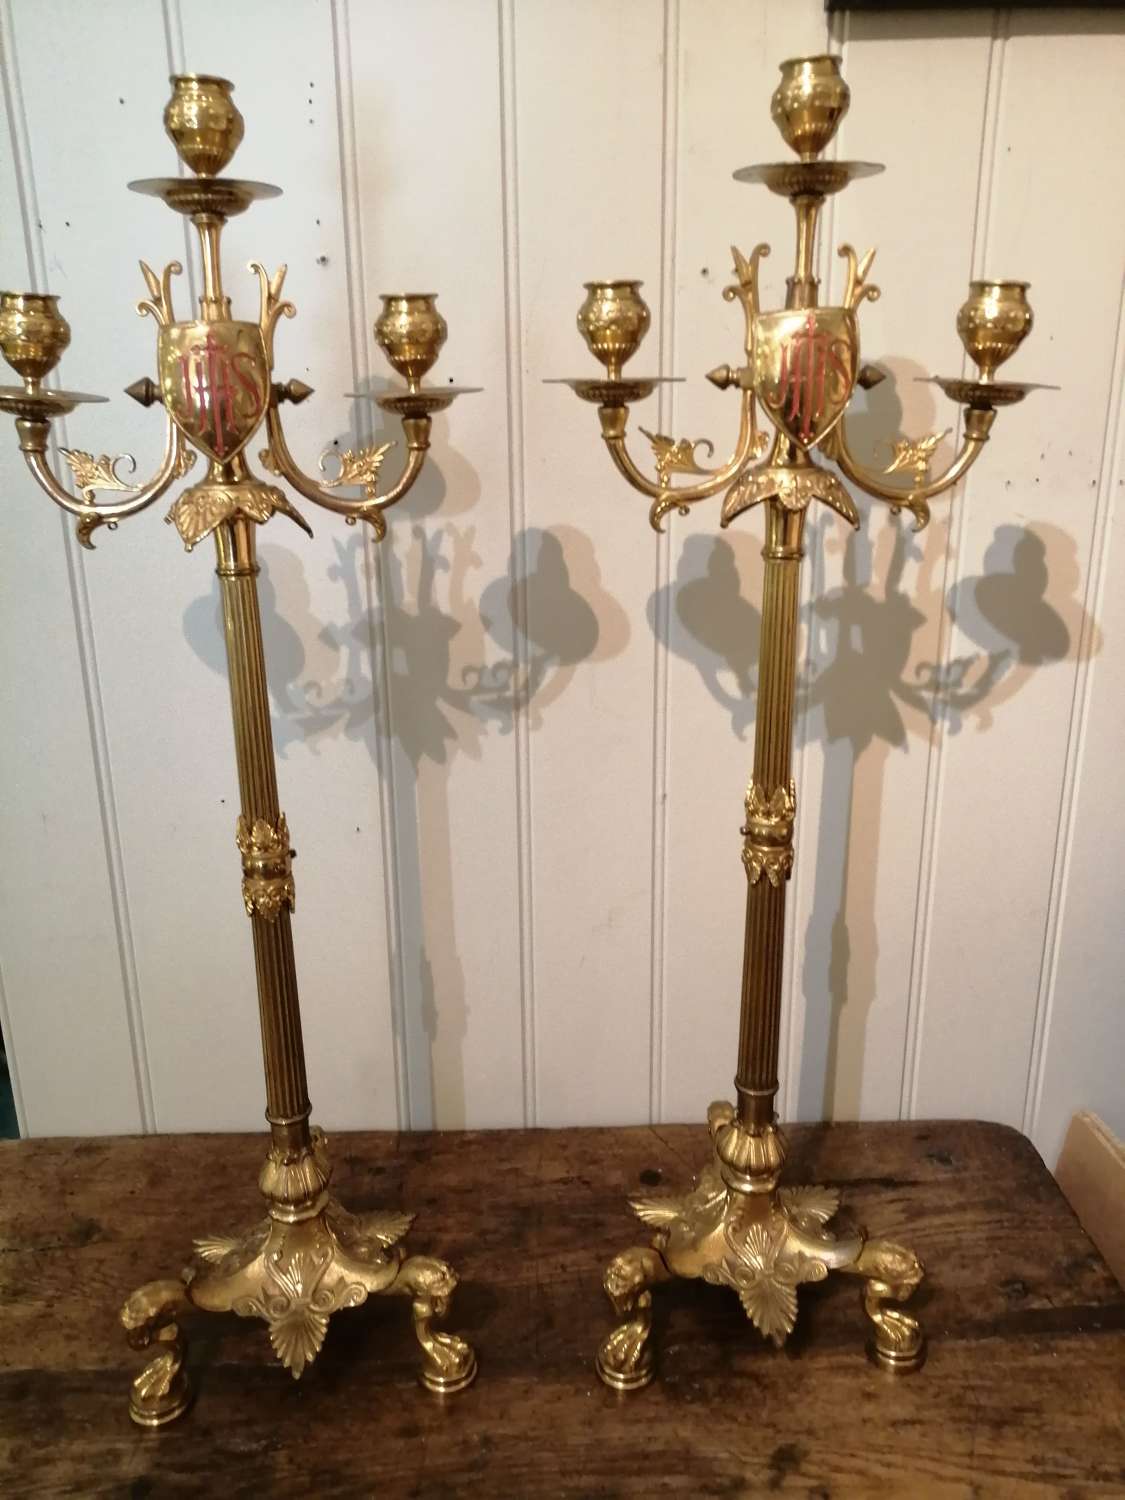 A stunning pair of 19th century Ecclesiastical candlesticks